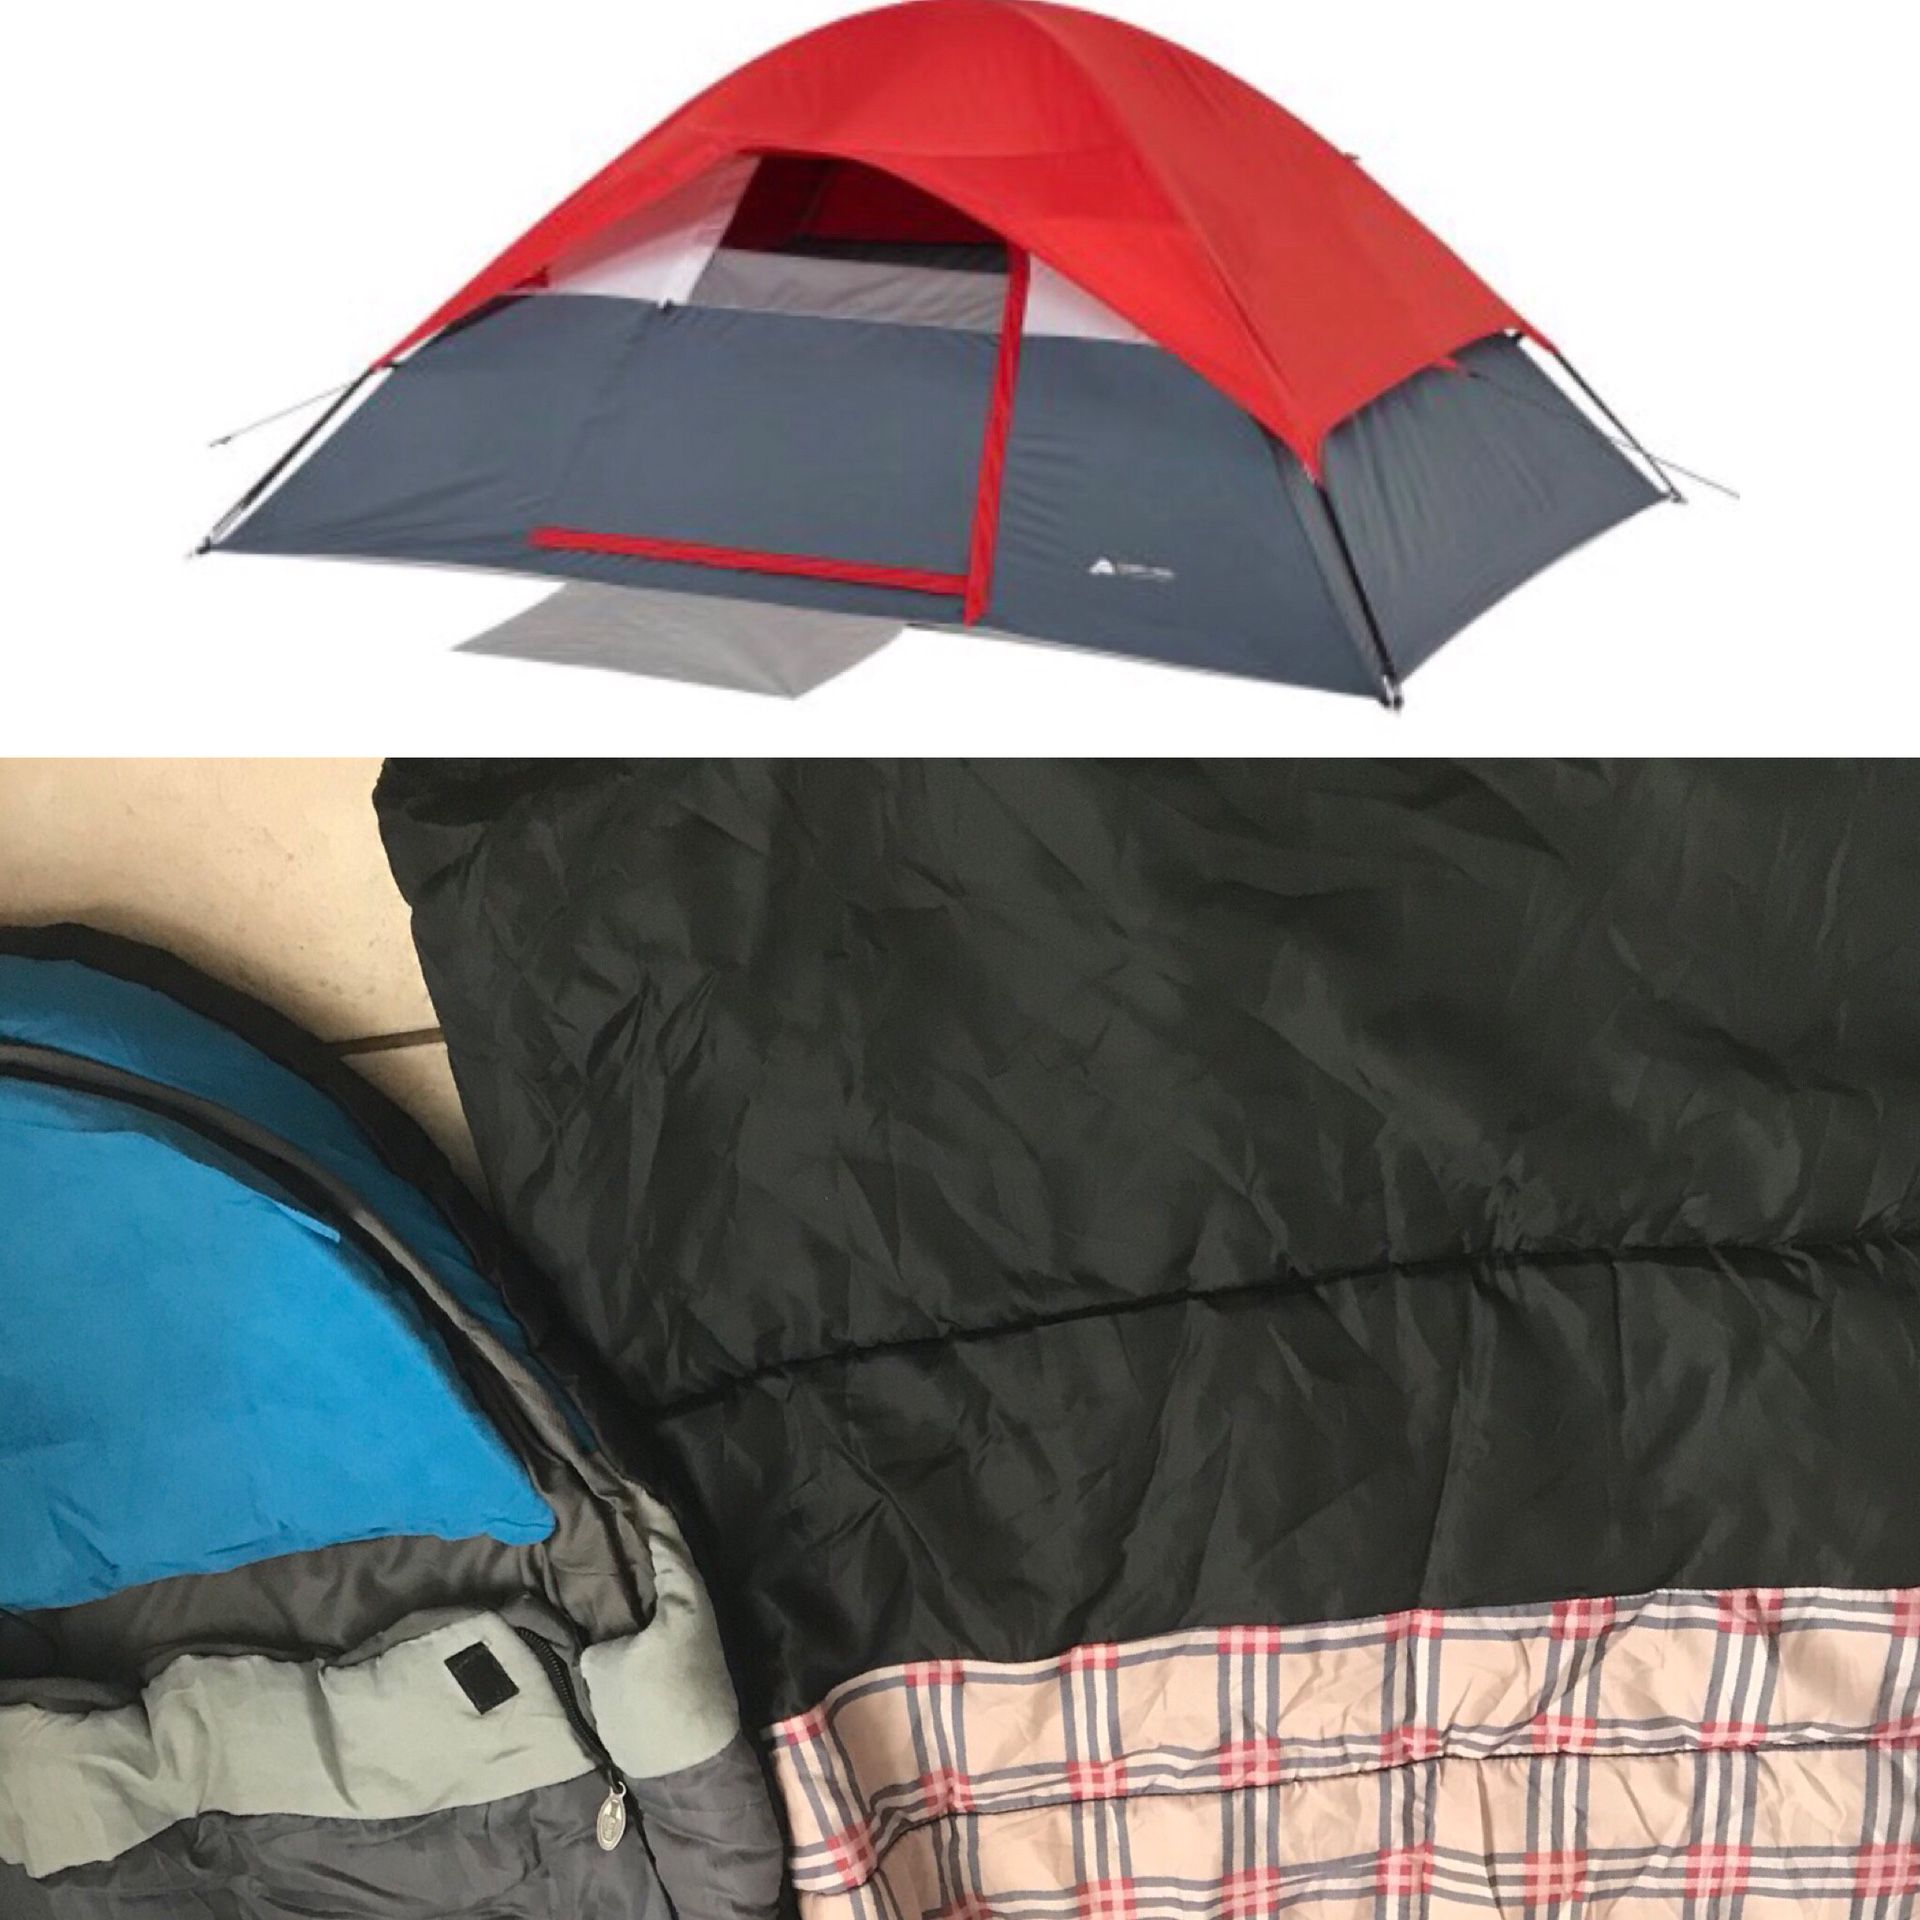 Camping set, 4 person tent with two sleeping bag